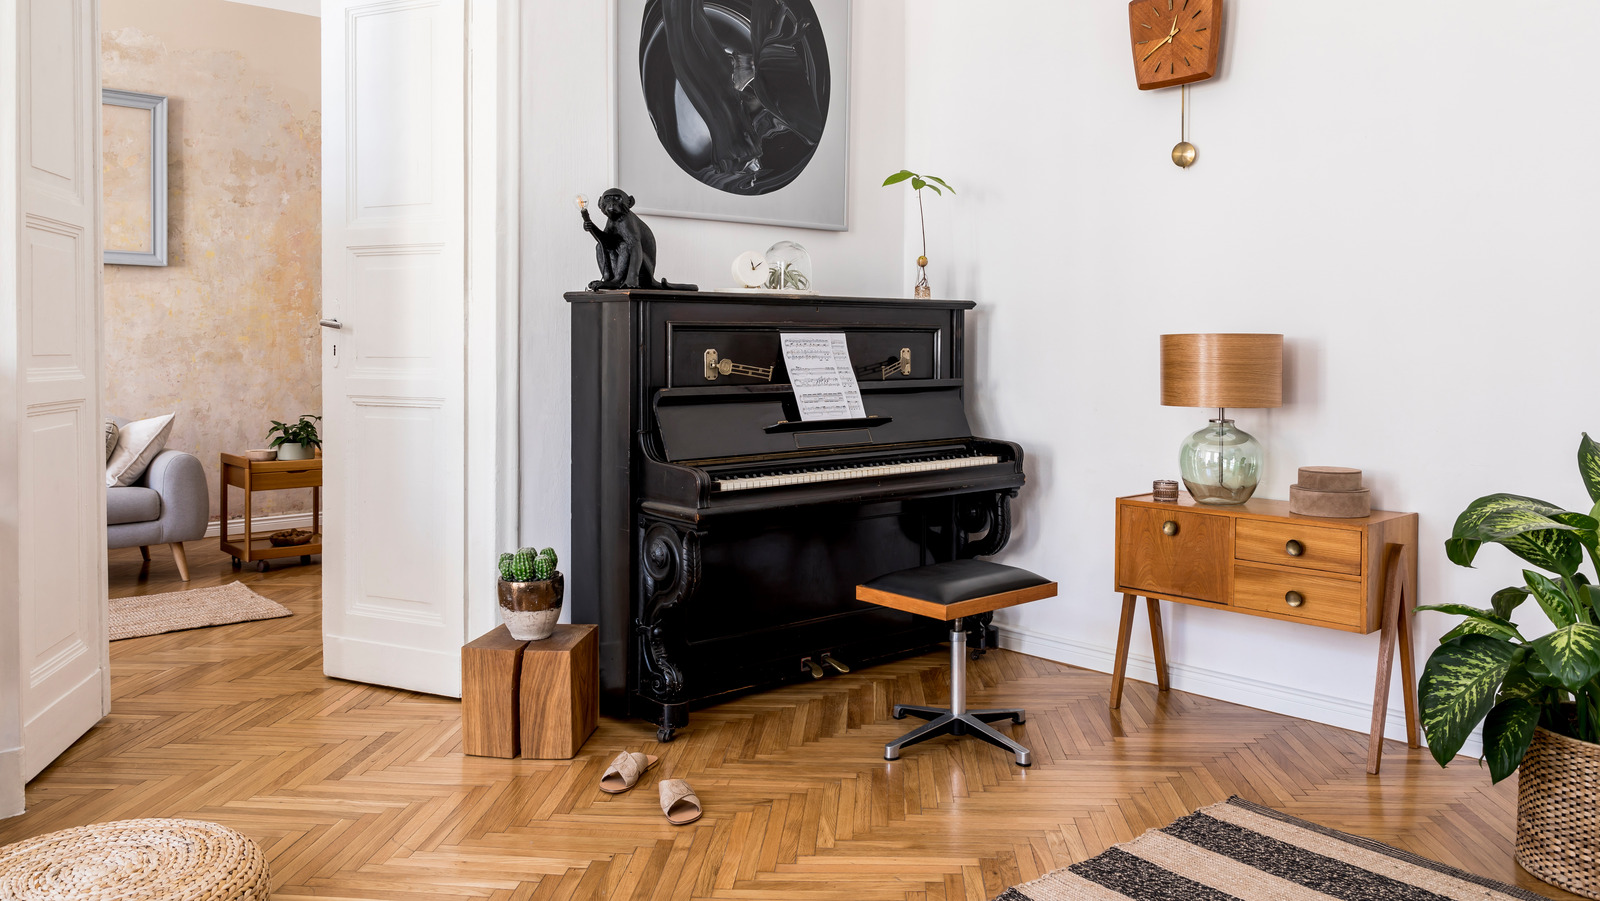 Modern,Composition,Of,Home,Interior,With,Stylish,Black,Piano,,Design